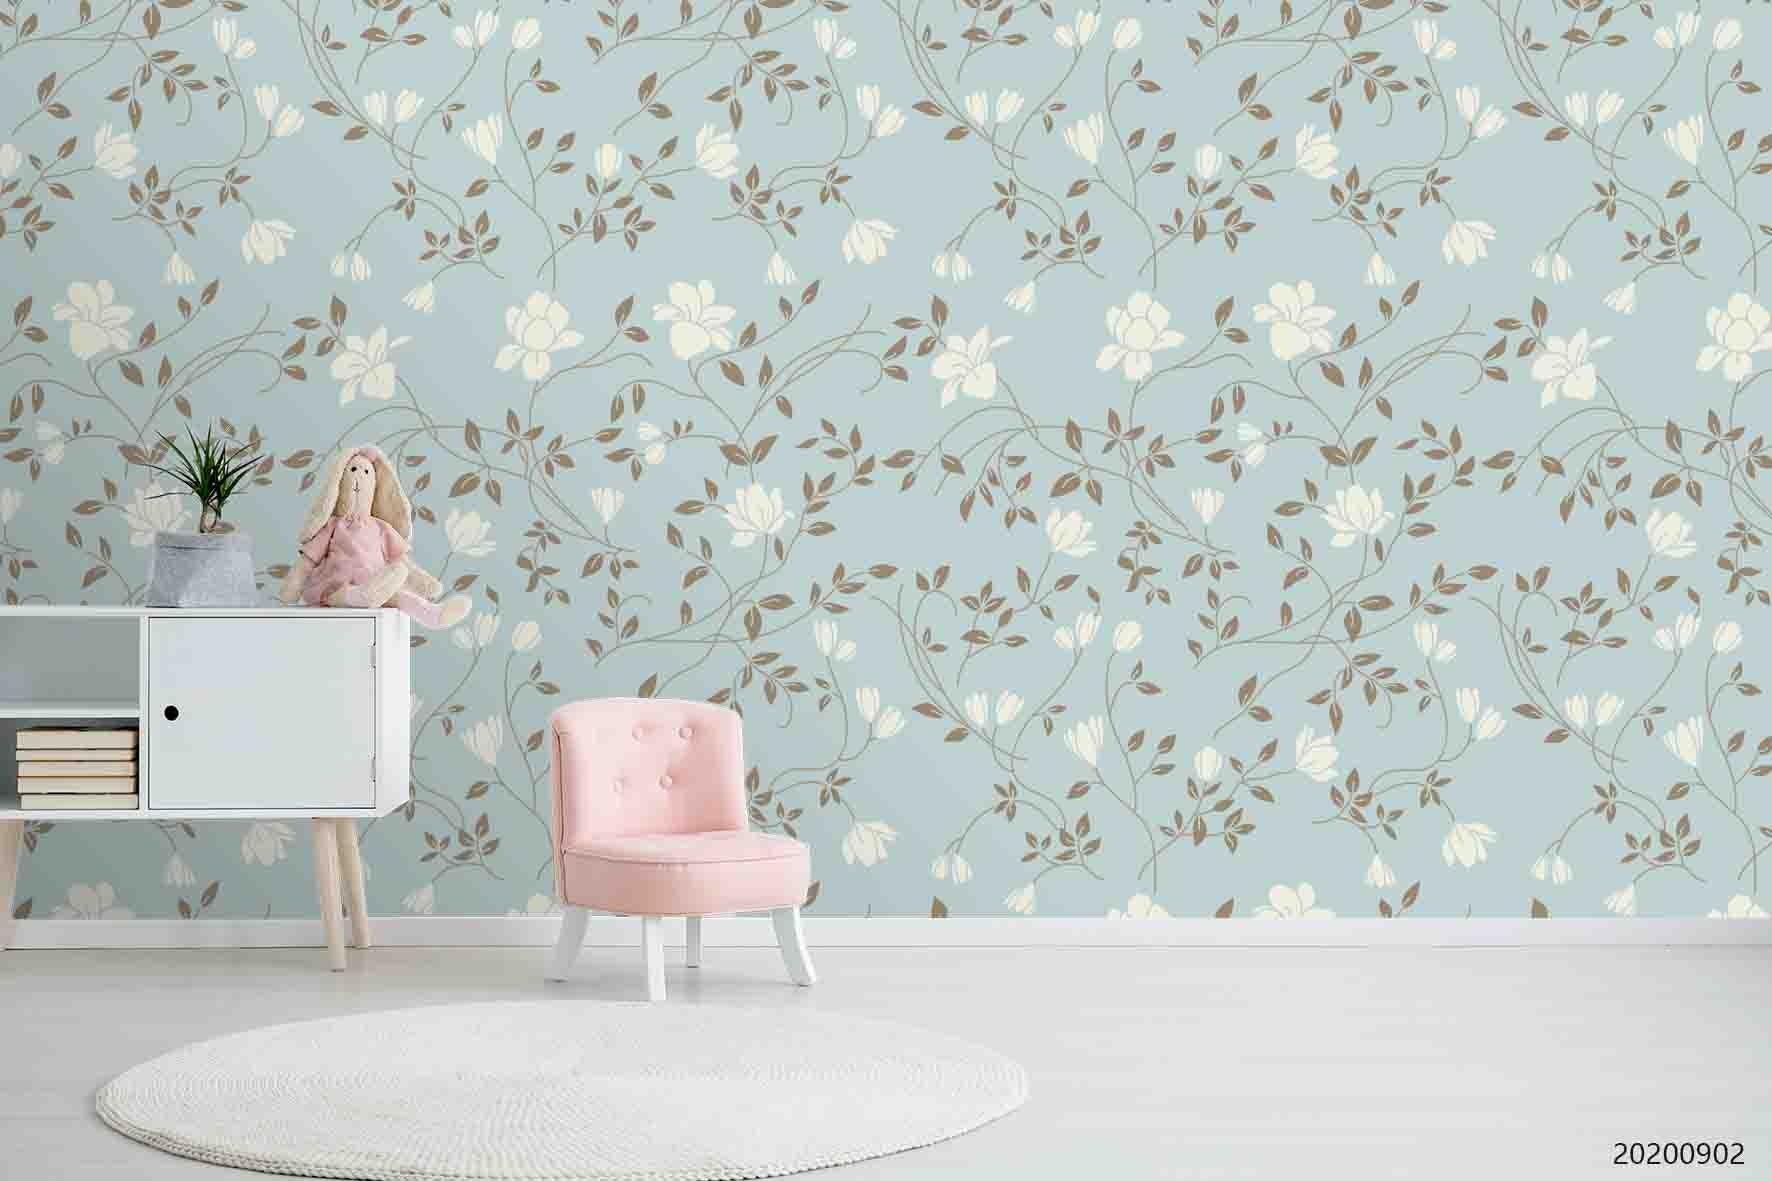 3D Hand Sketching White Floral Plant Wall Mural Wallpaper LXL 1243- Jess Art Decoration